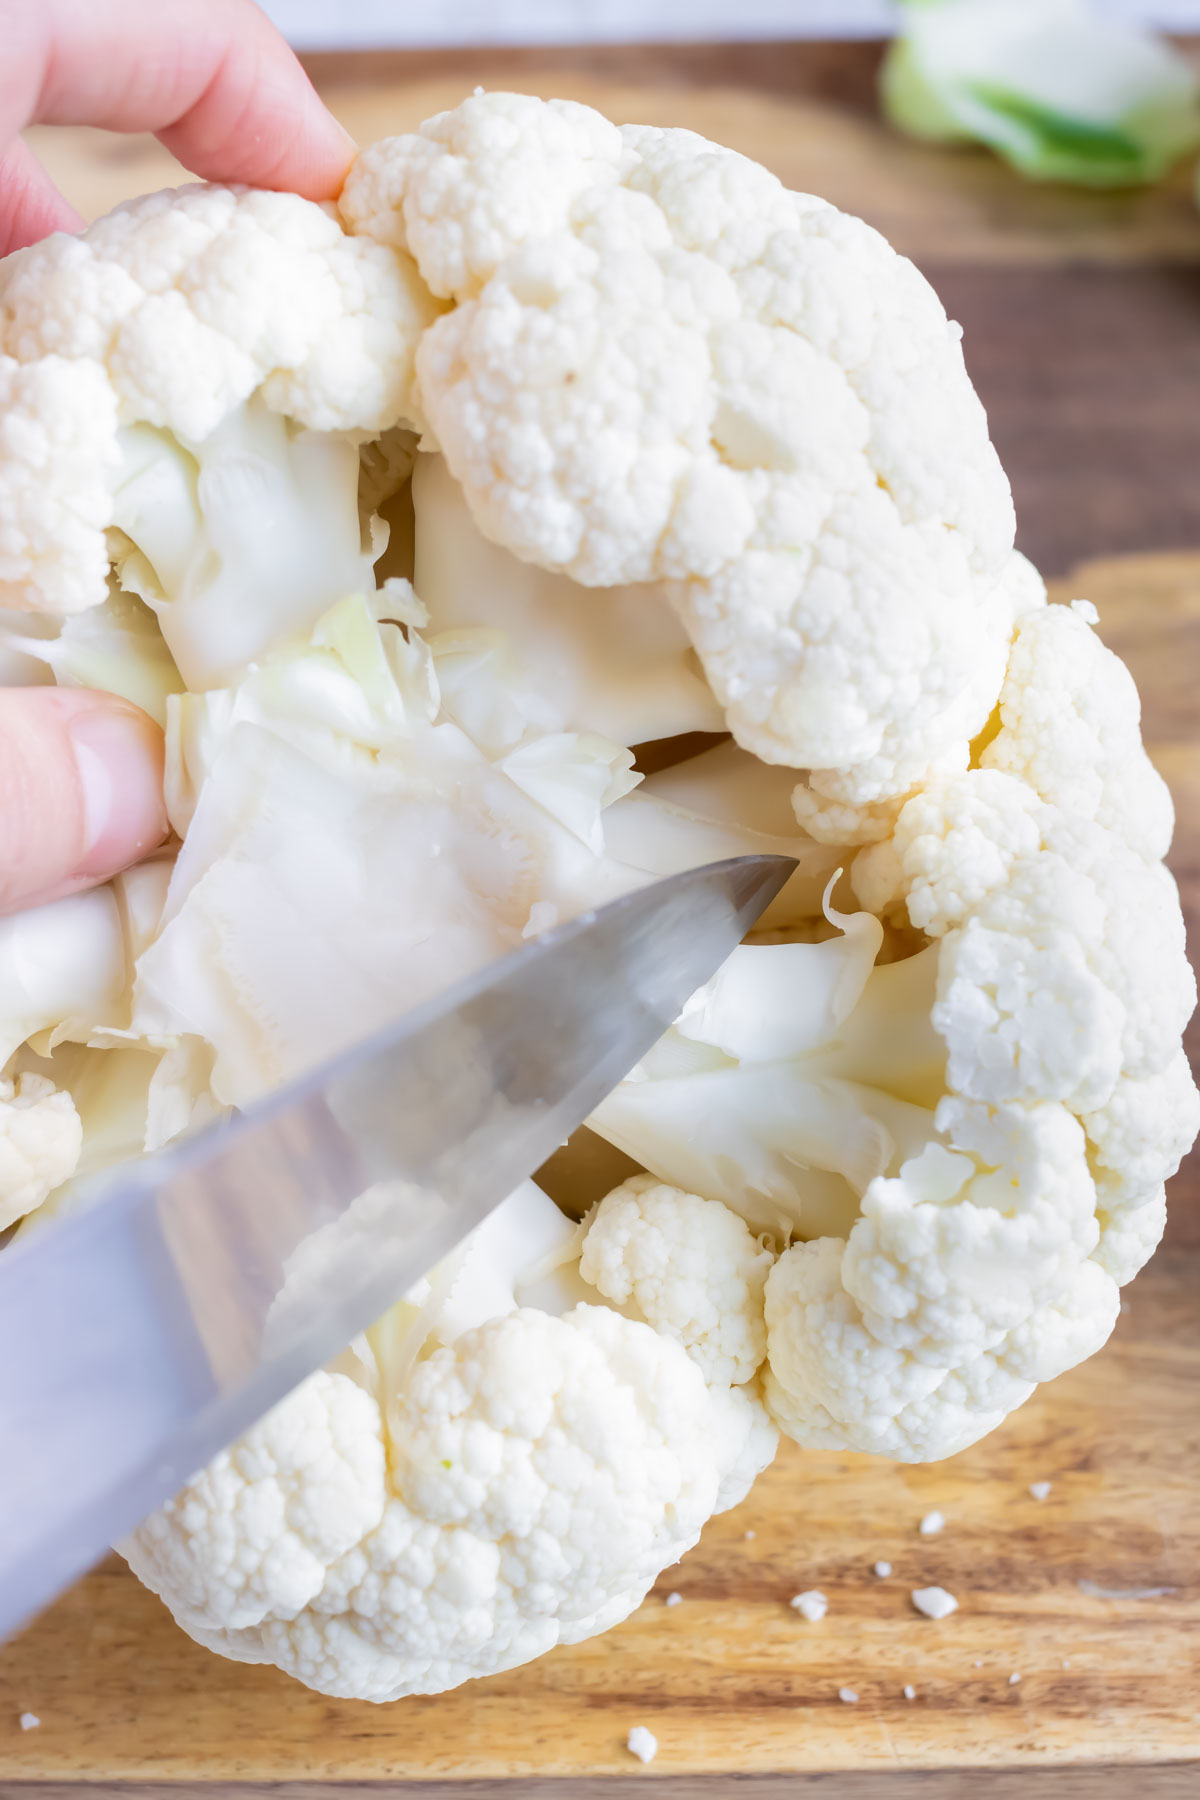 Removing the cauliflower stem from the head.